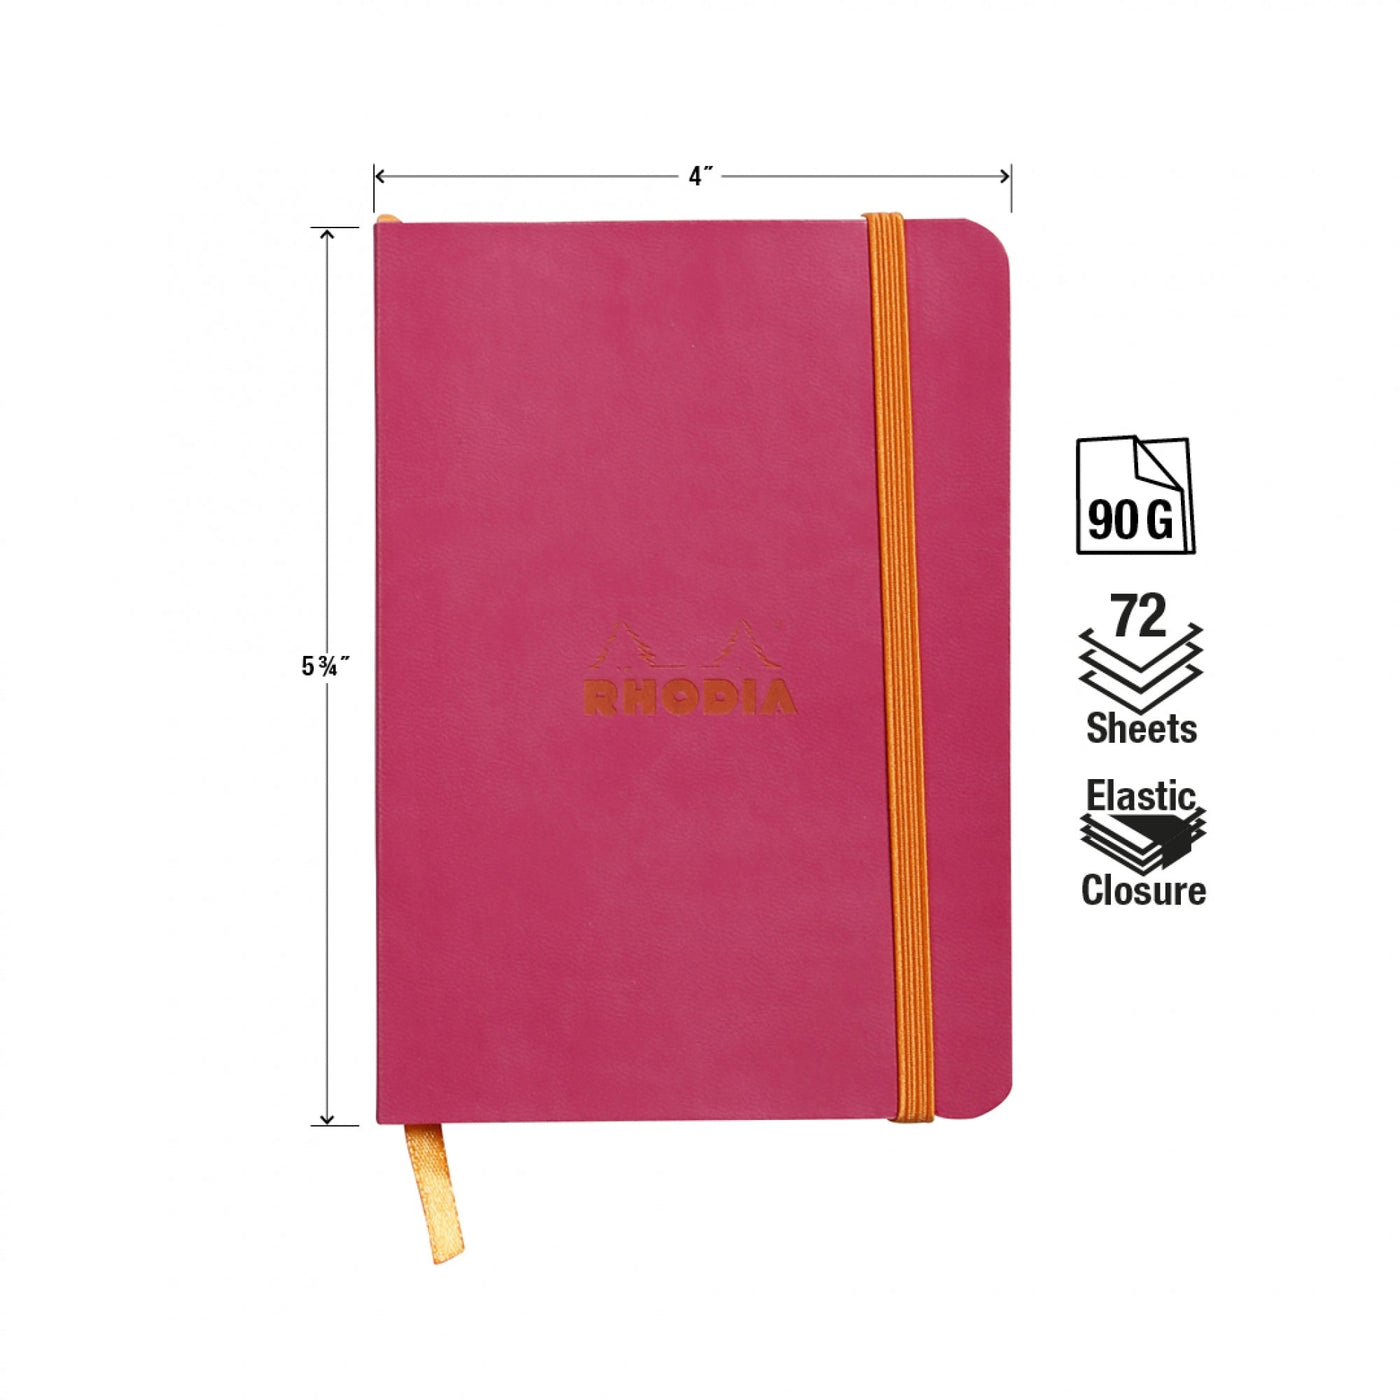 Rhodia Rhodiarama Raspberry A6 Soft Cover Dotted Notebook Measurements